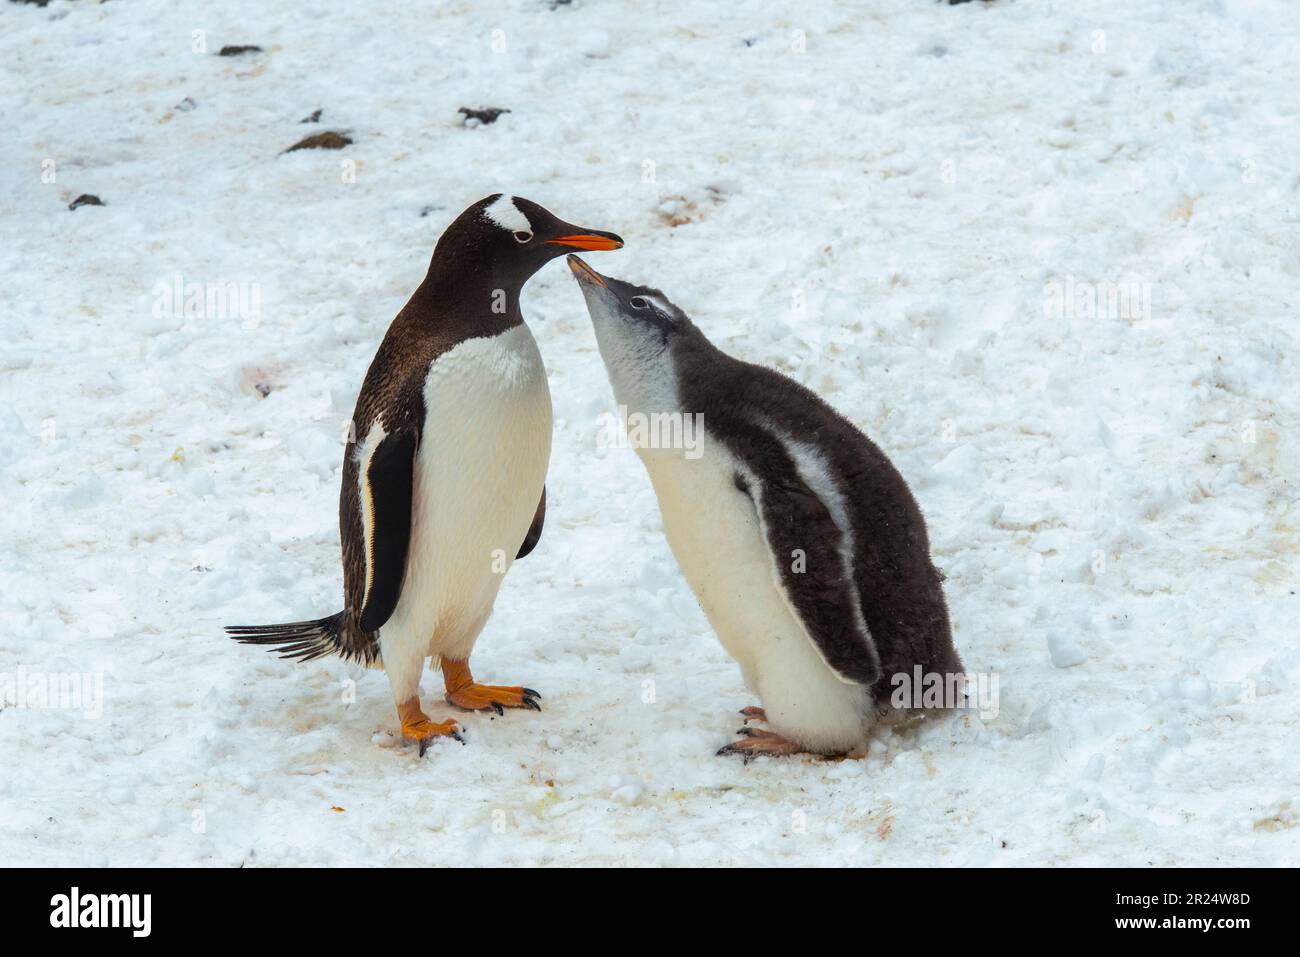 Brown Bluff, Antarctica. A hungry penguin chick nudges its mom for food. Stock Photo